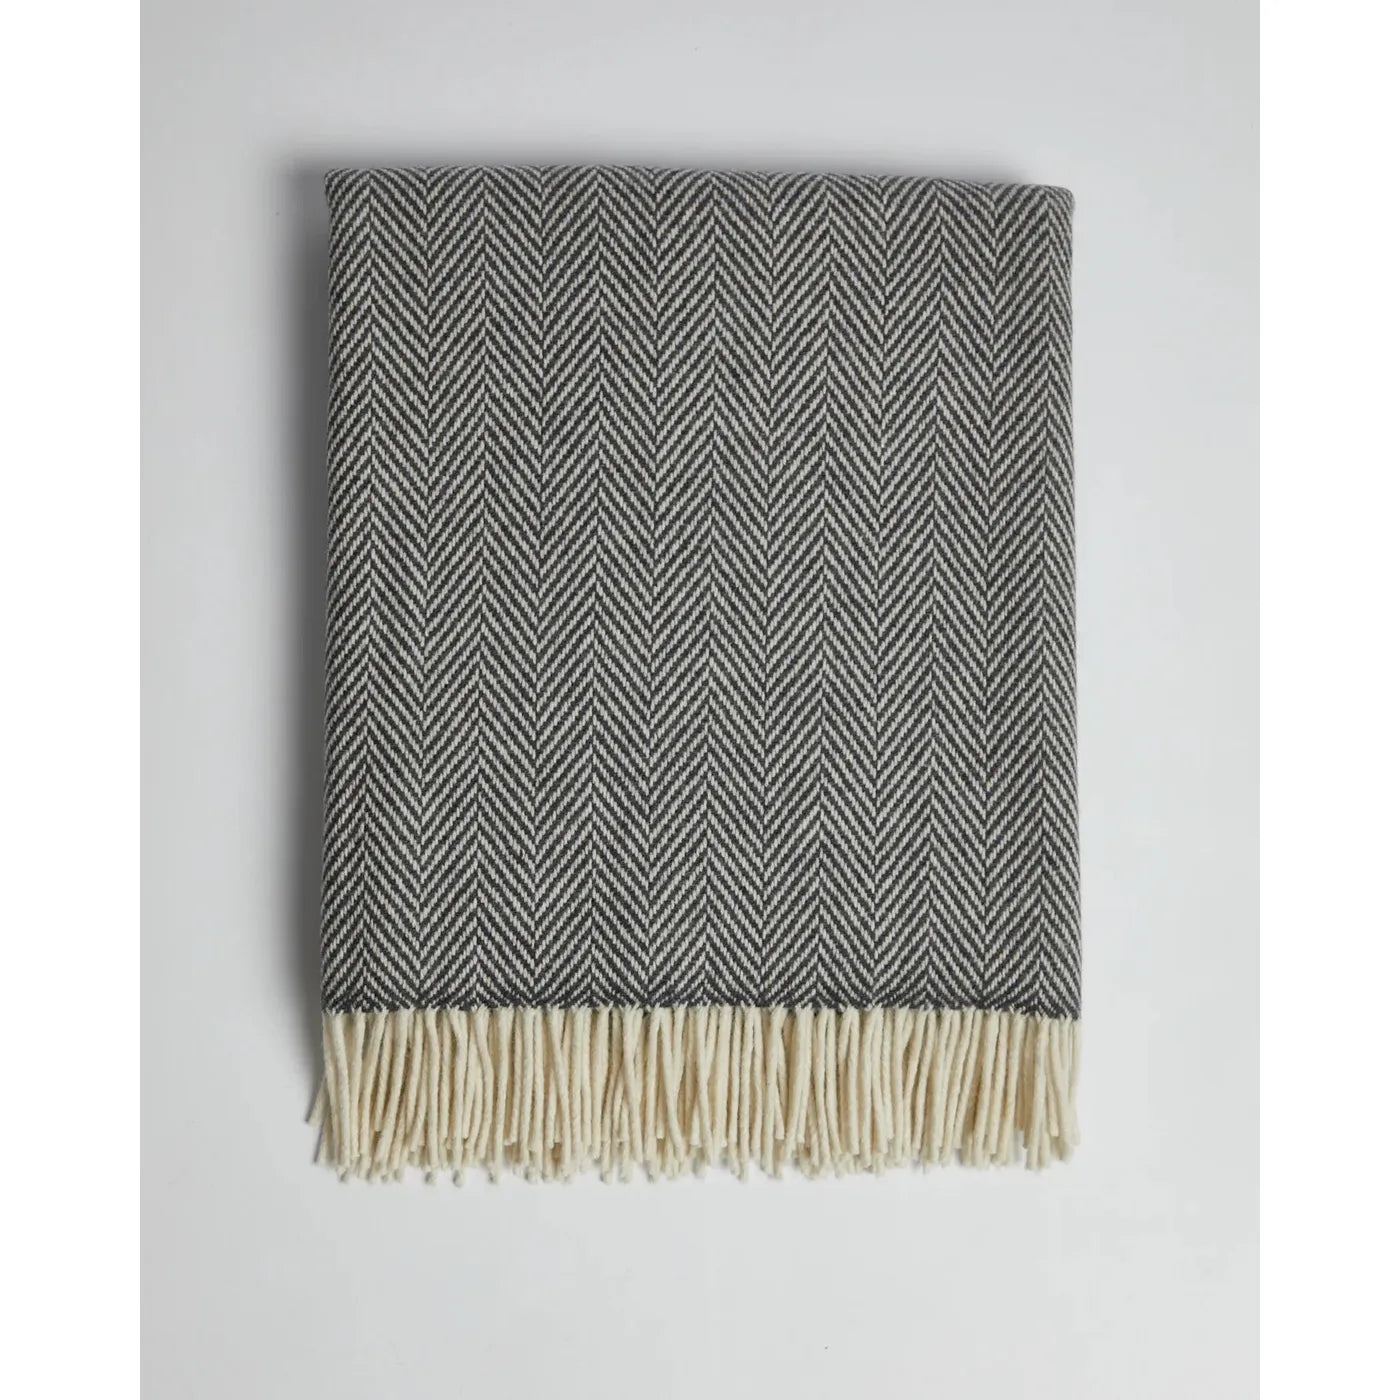 Belleek Cashmere and Lambswool Throw - Foxford